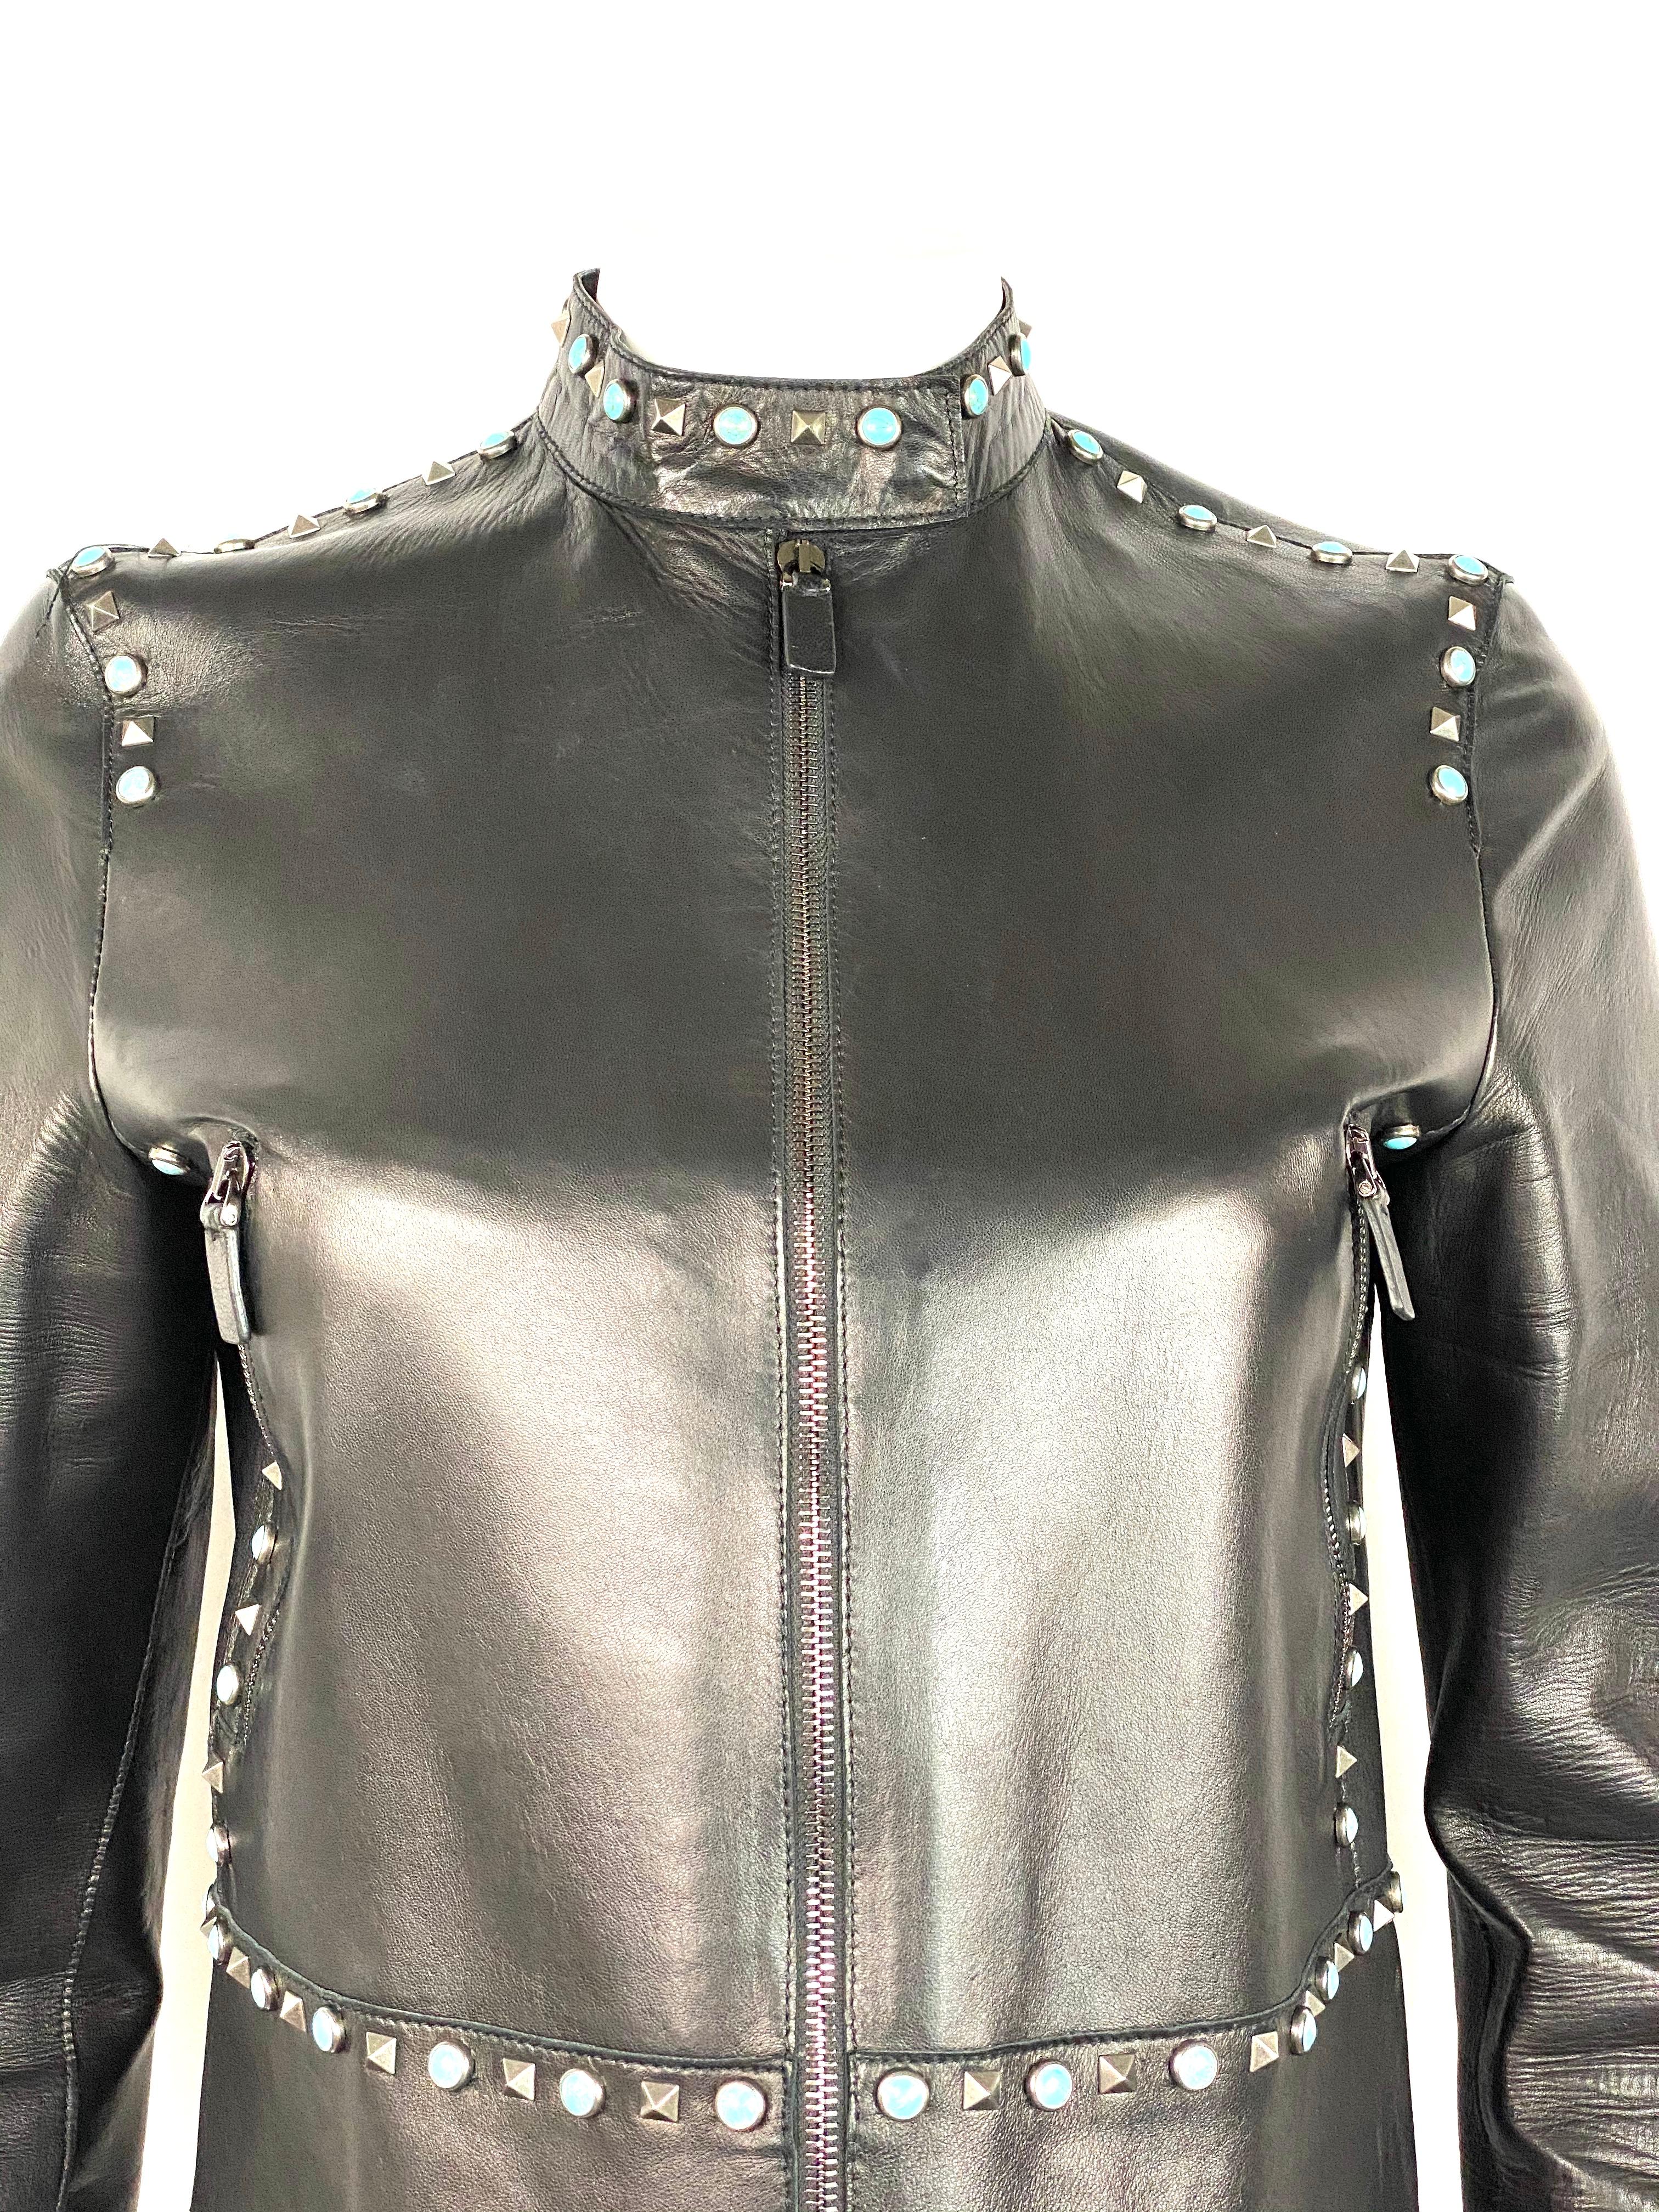 Valentino Black Leather Studded Jacket Size 8

Product details:
Size 8
Silver tone geometric and turquoise round studs detail
Collar
Zip closure
Two front zipped pockets
Two silver tone buckles on each side
One zipper detail on the bottom of each